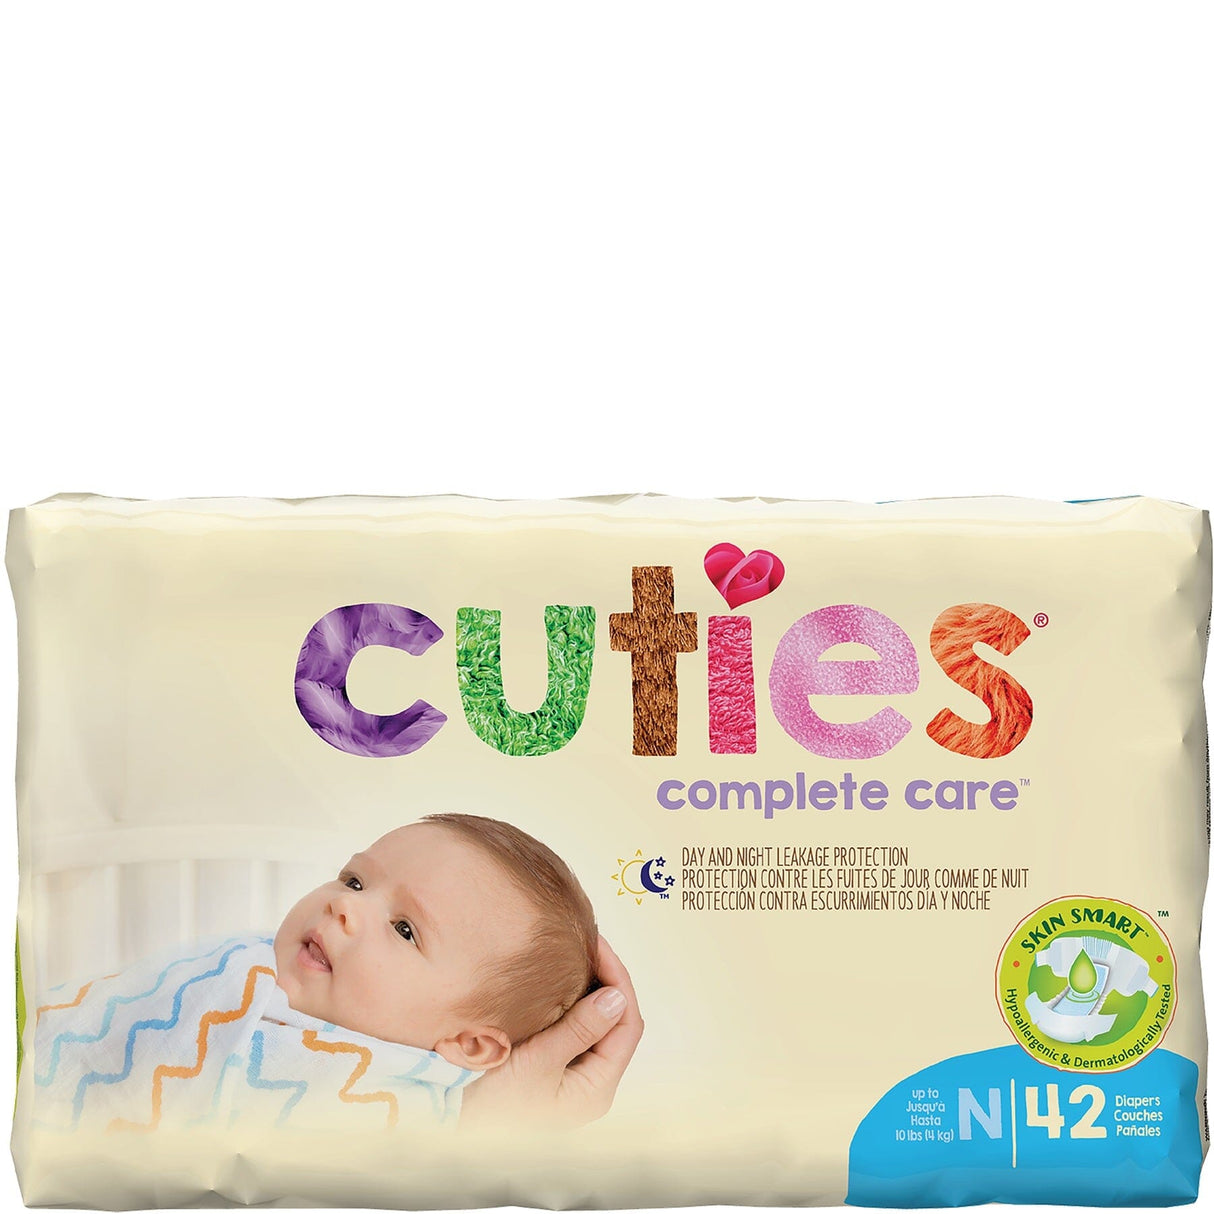 Image of Cuties® Baby Diaper Size Newborn, Up to 10 lb - Replaces: FQCCC00